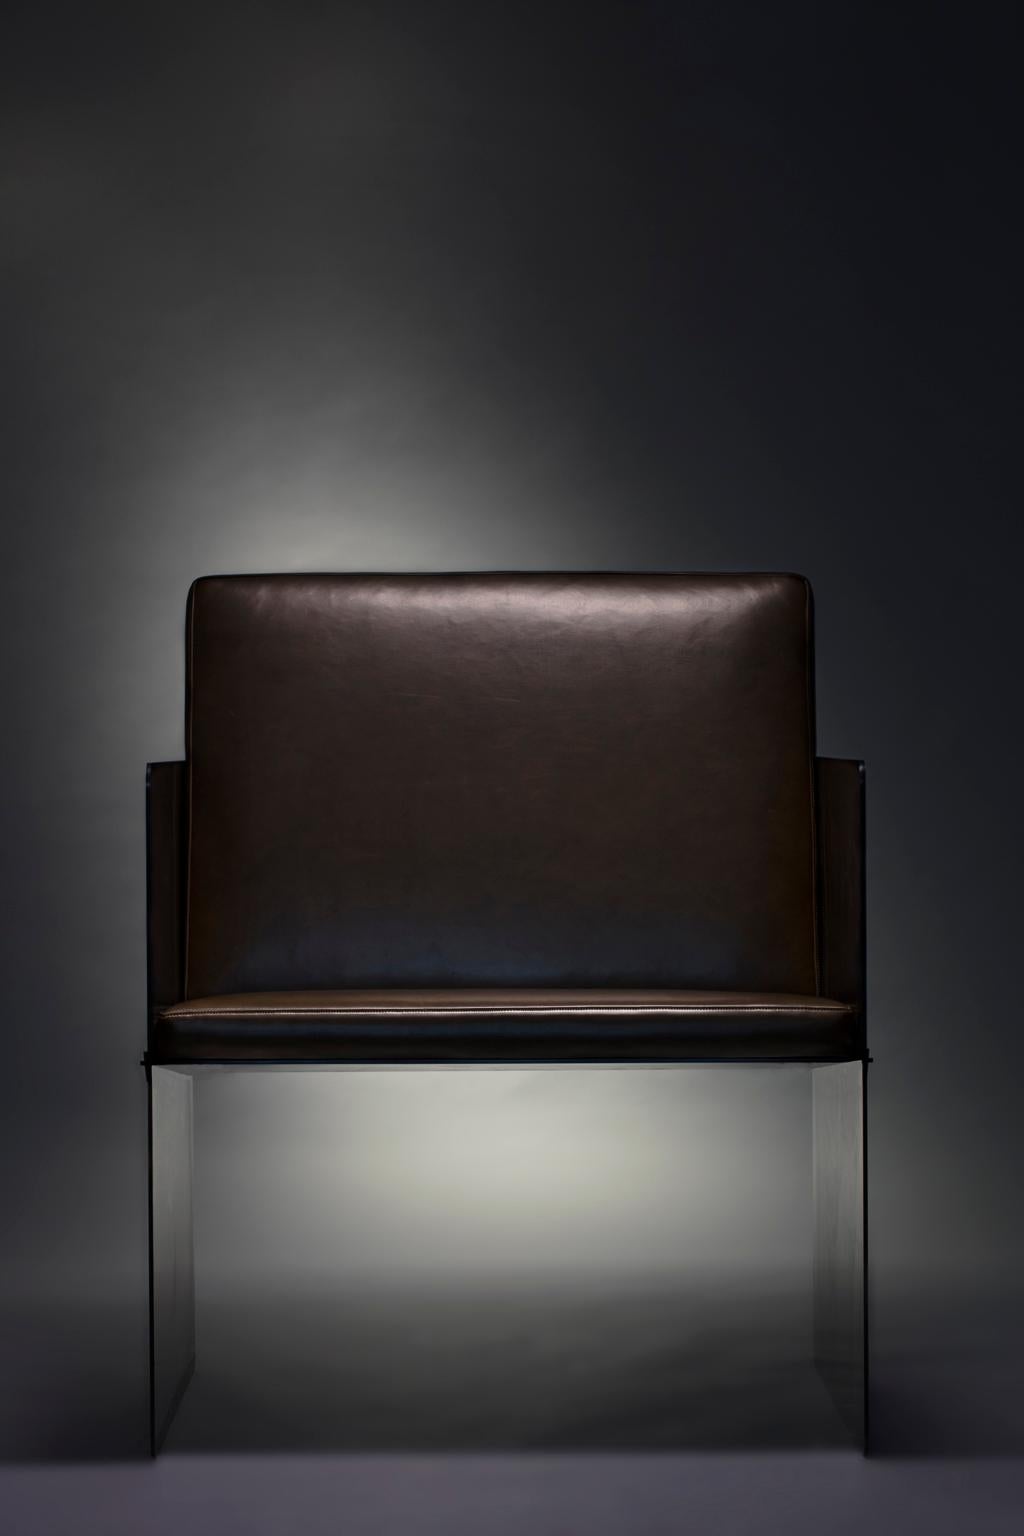 Collection I: Plate chair

Constructed from bold steel plates and secured by bronze wedges, the plate chair is built to last.
Resolute and refined, the deep black, hand-applied finish accentuates textural variations from the Industrial sheet